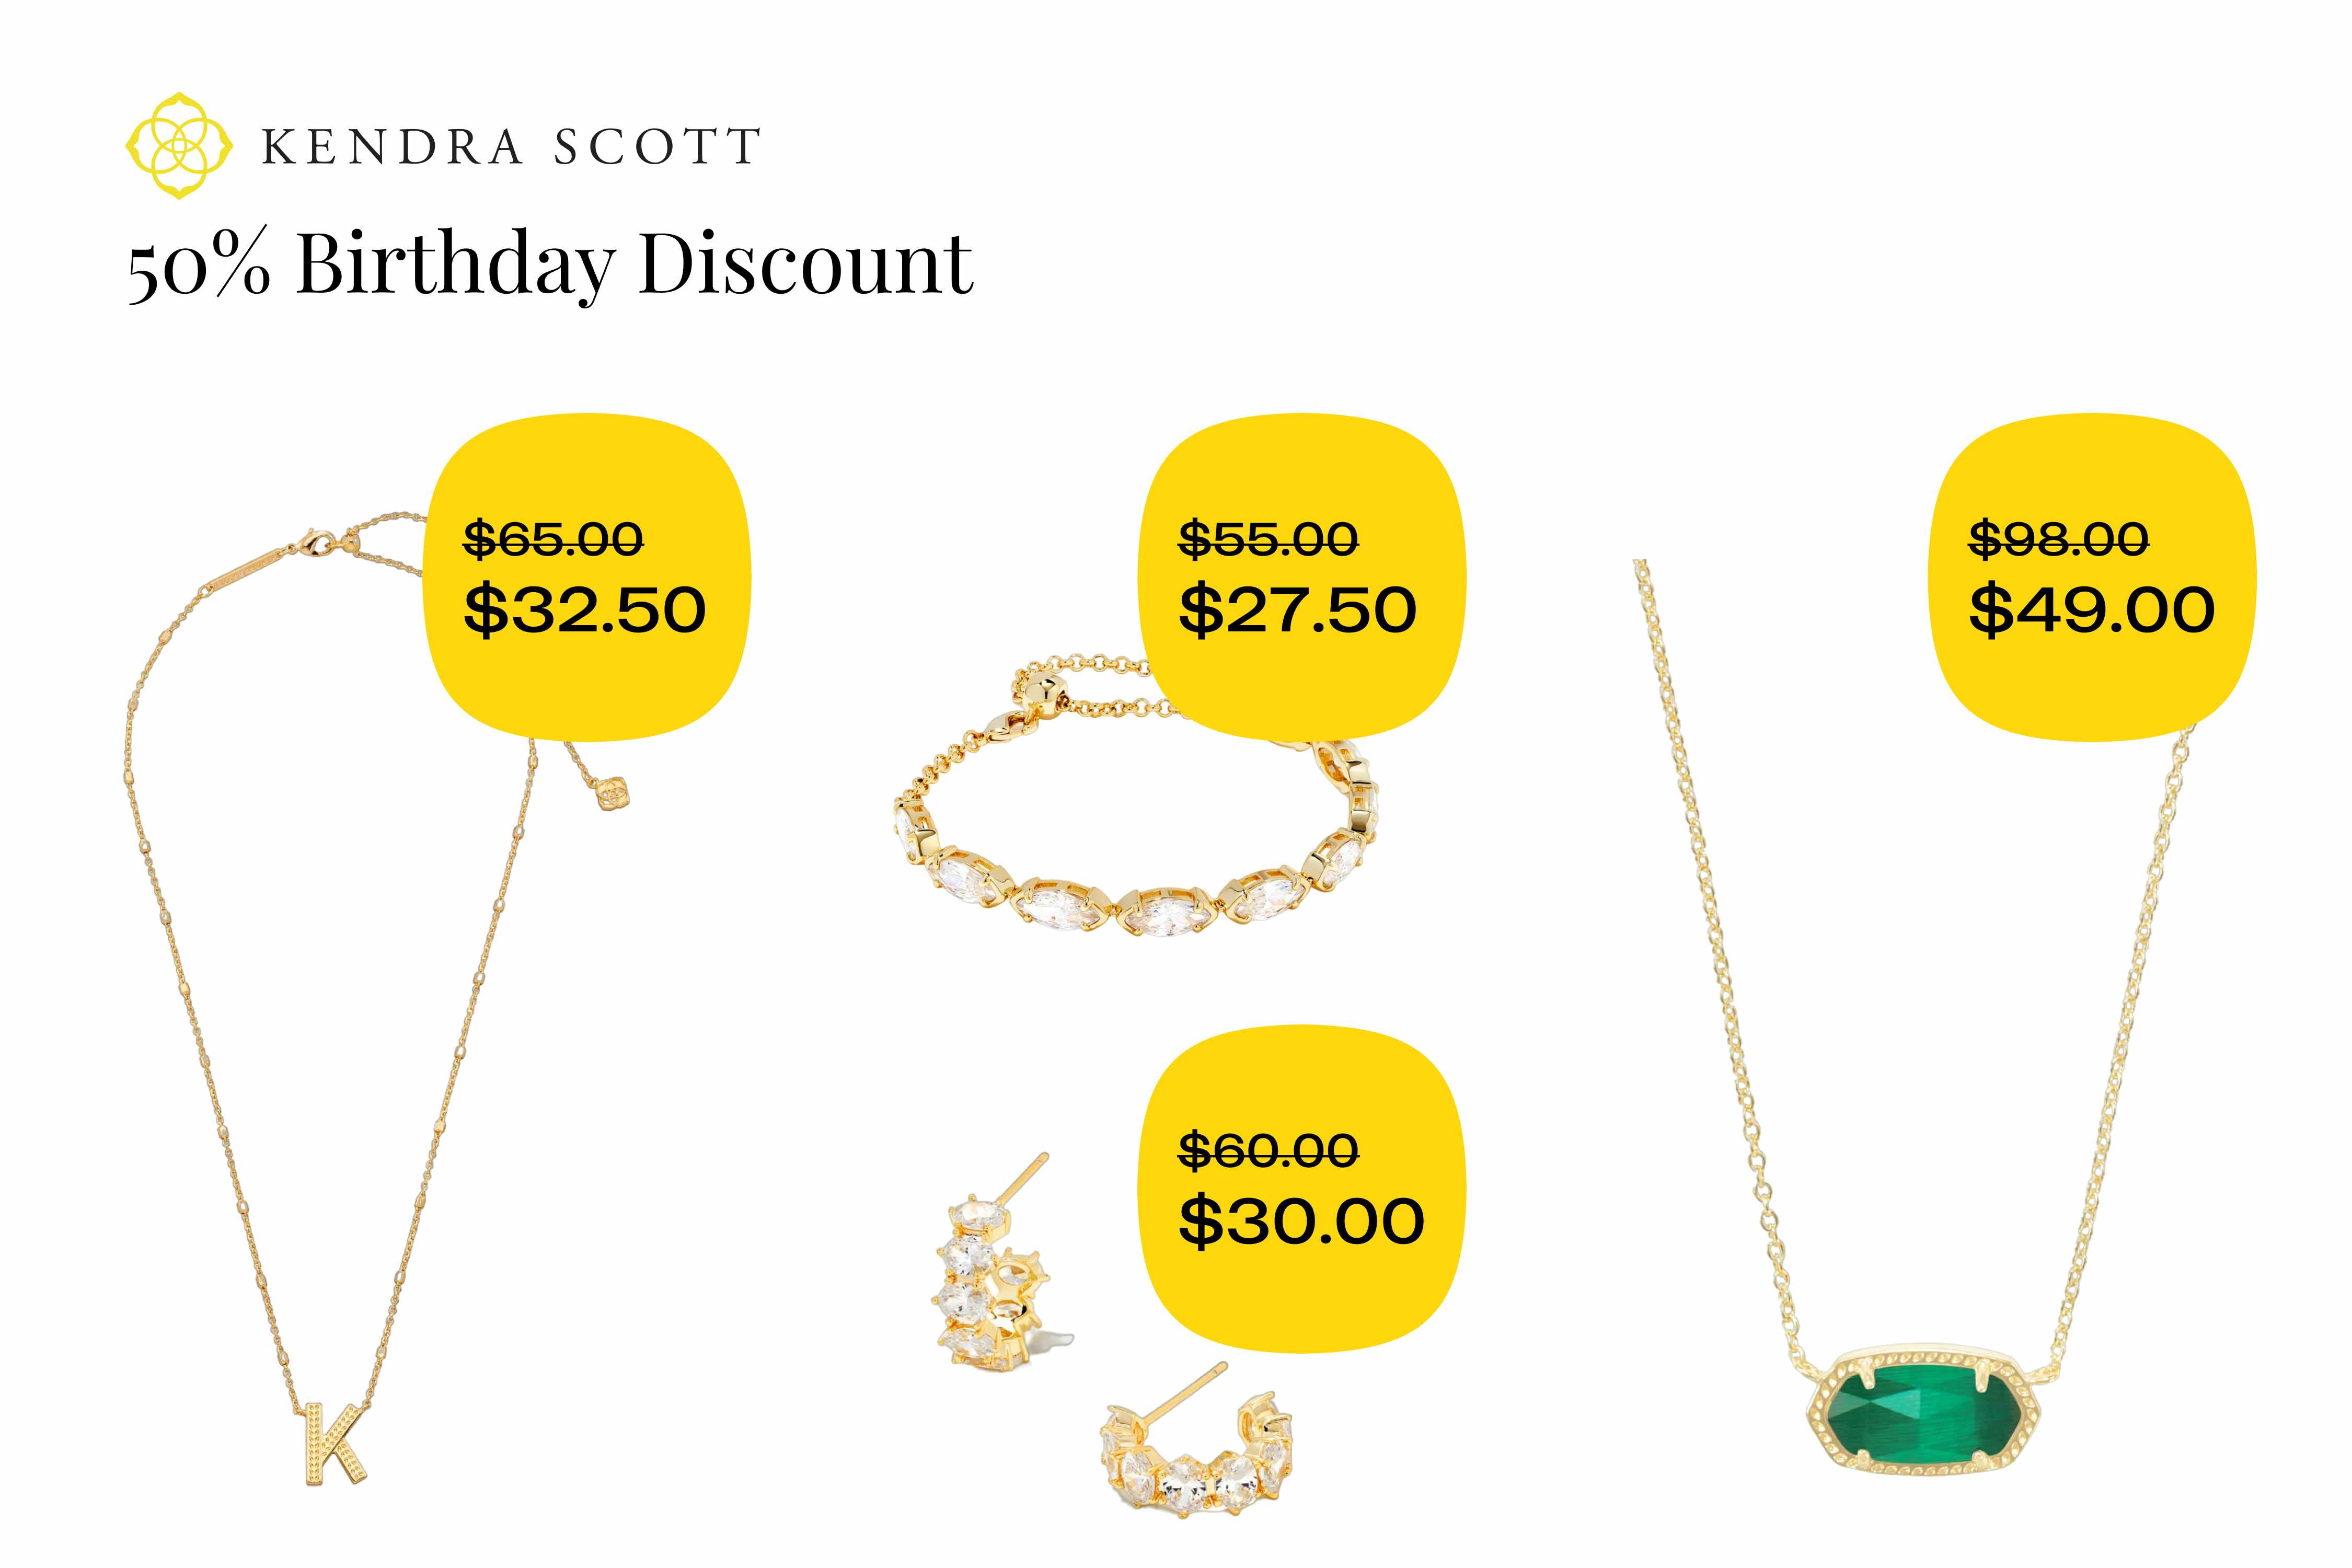 jewelry from Kendra Scott with a 50% birthday discount